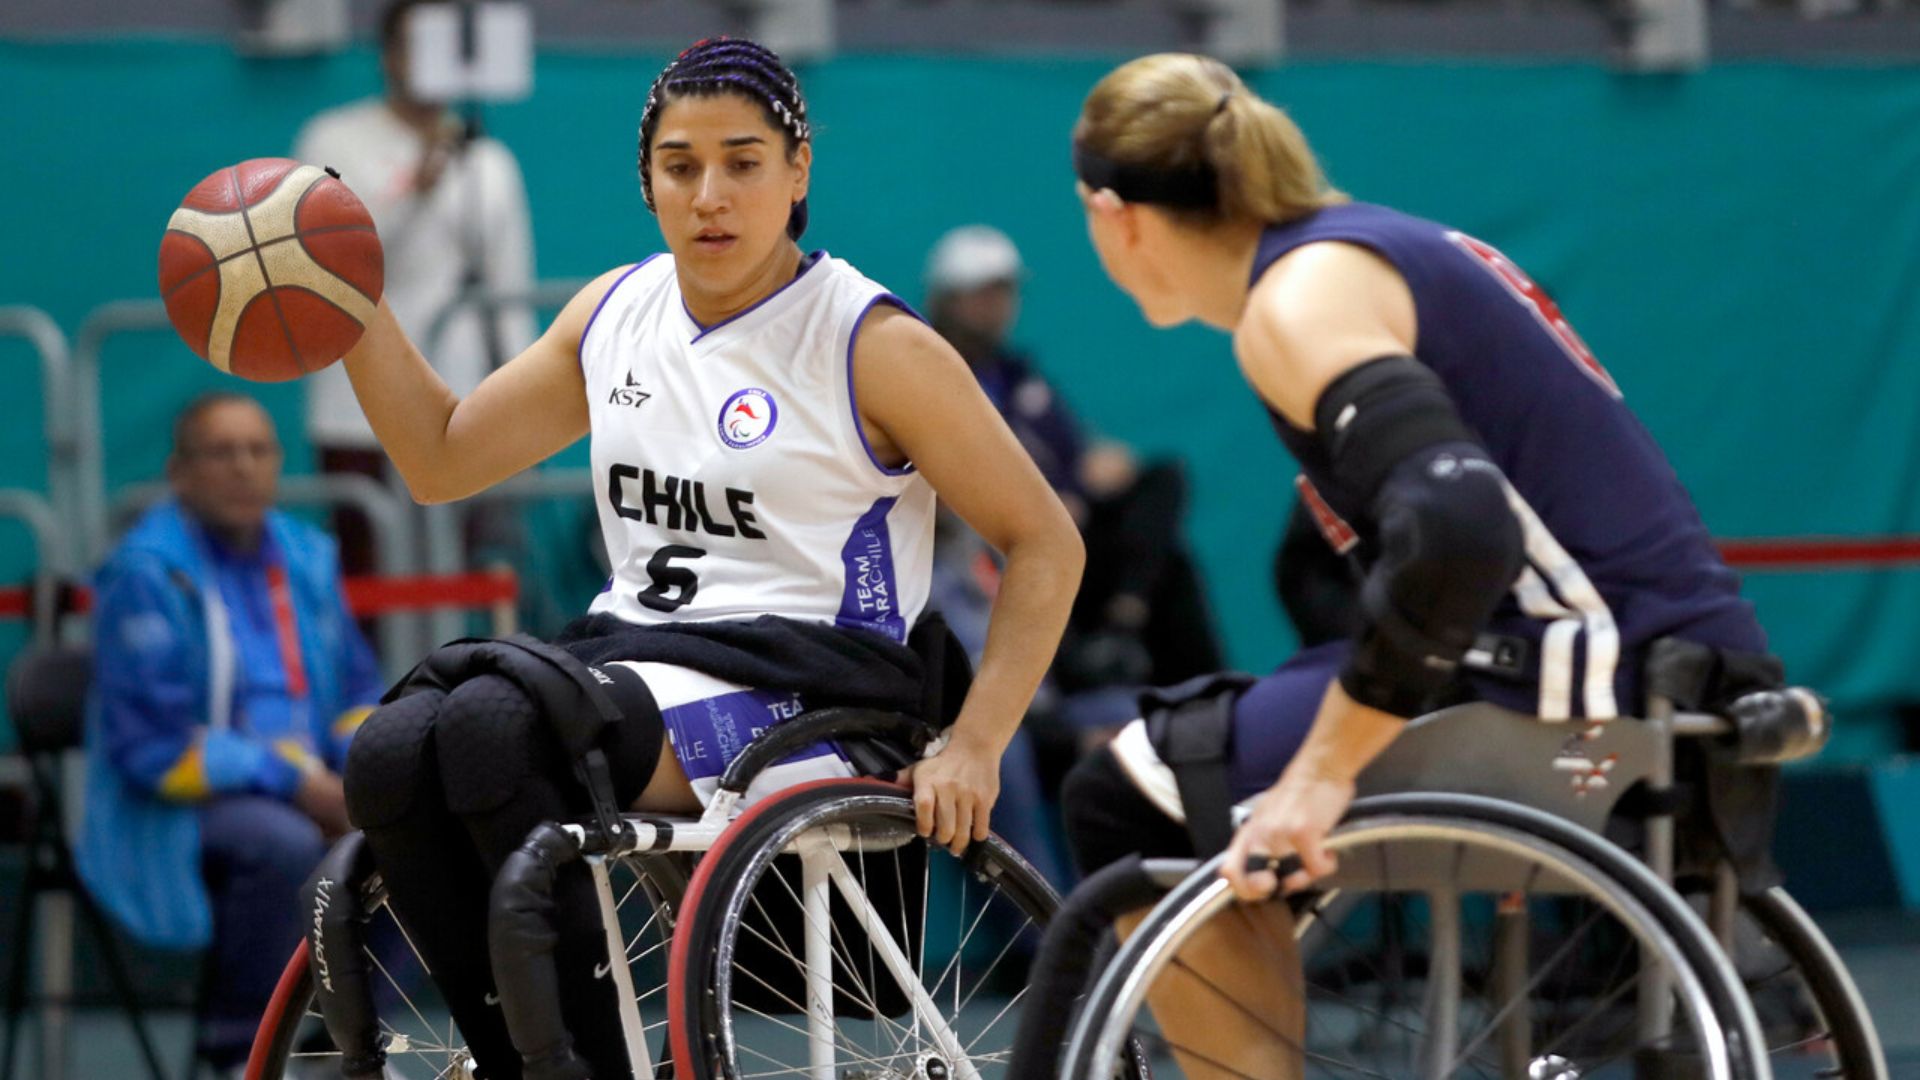 United States Defeats Chile 96-10 in Wheelchair Basketball